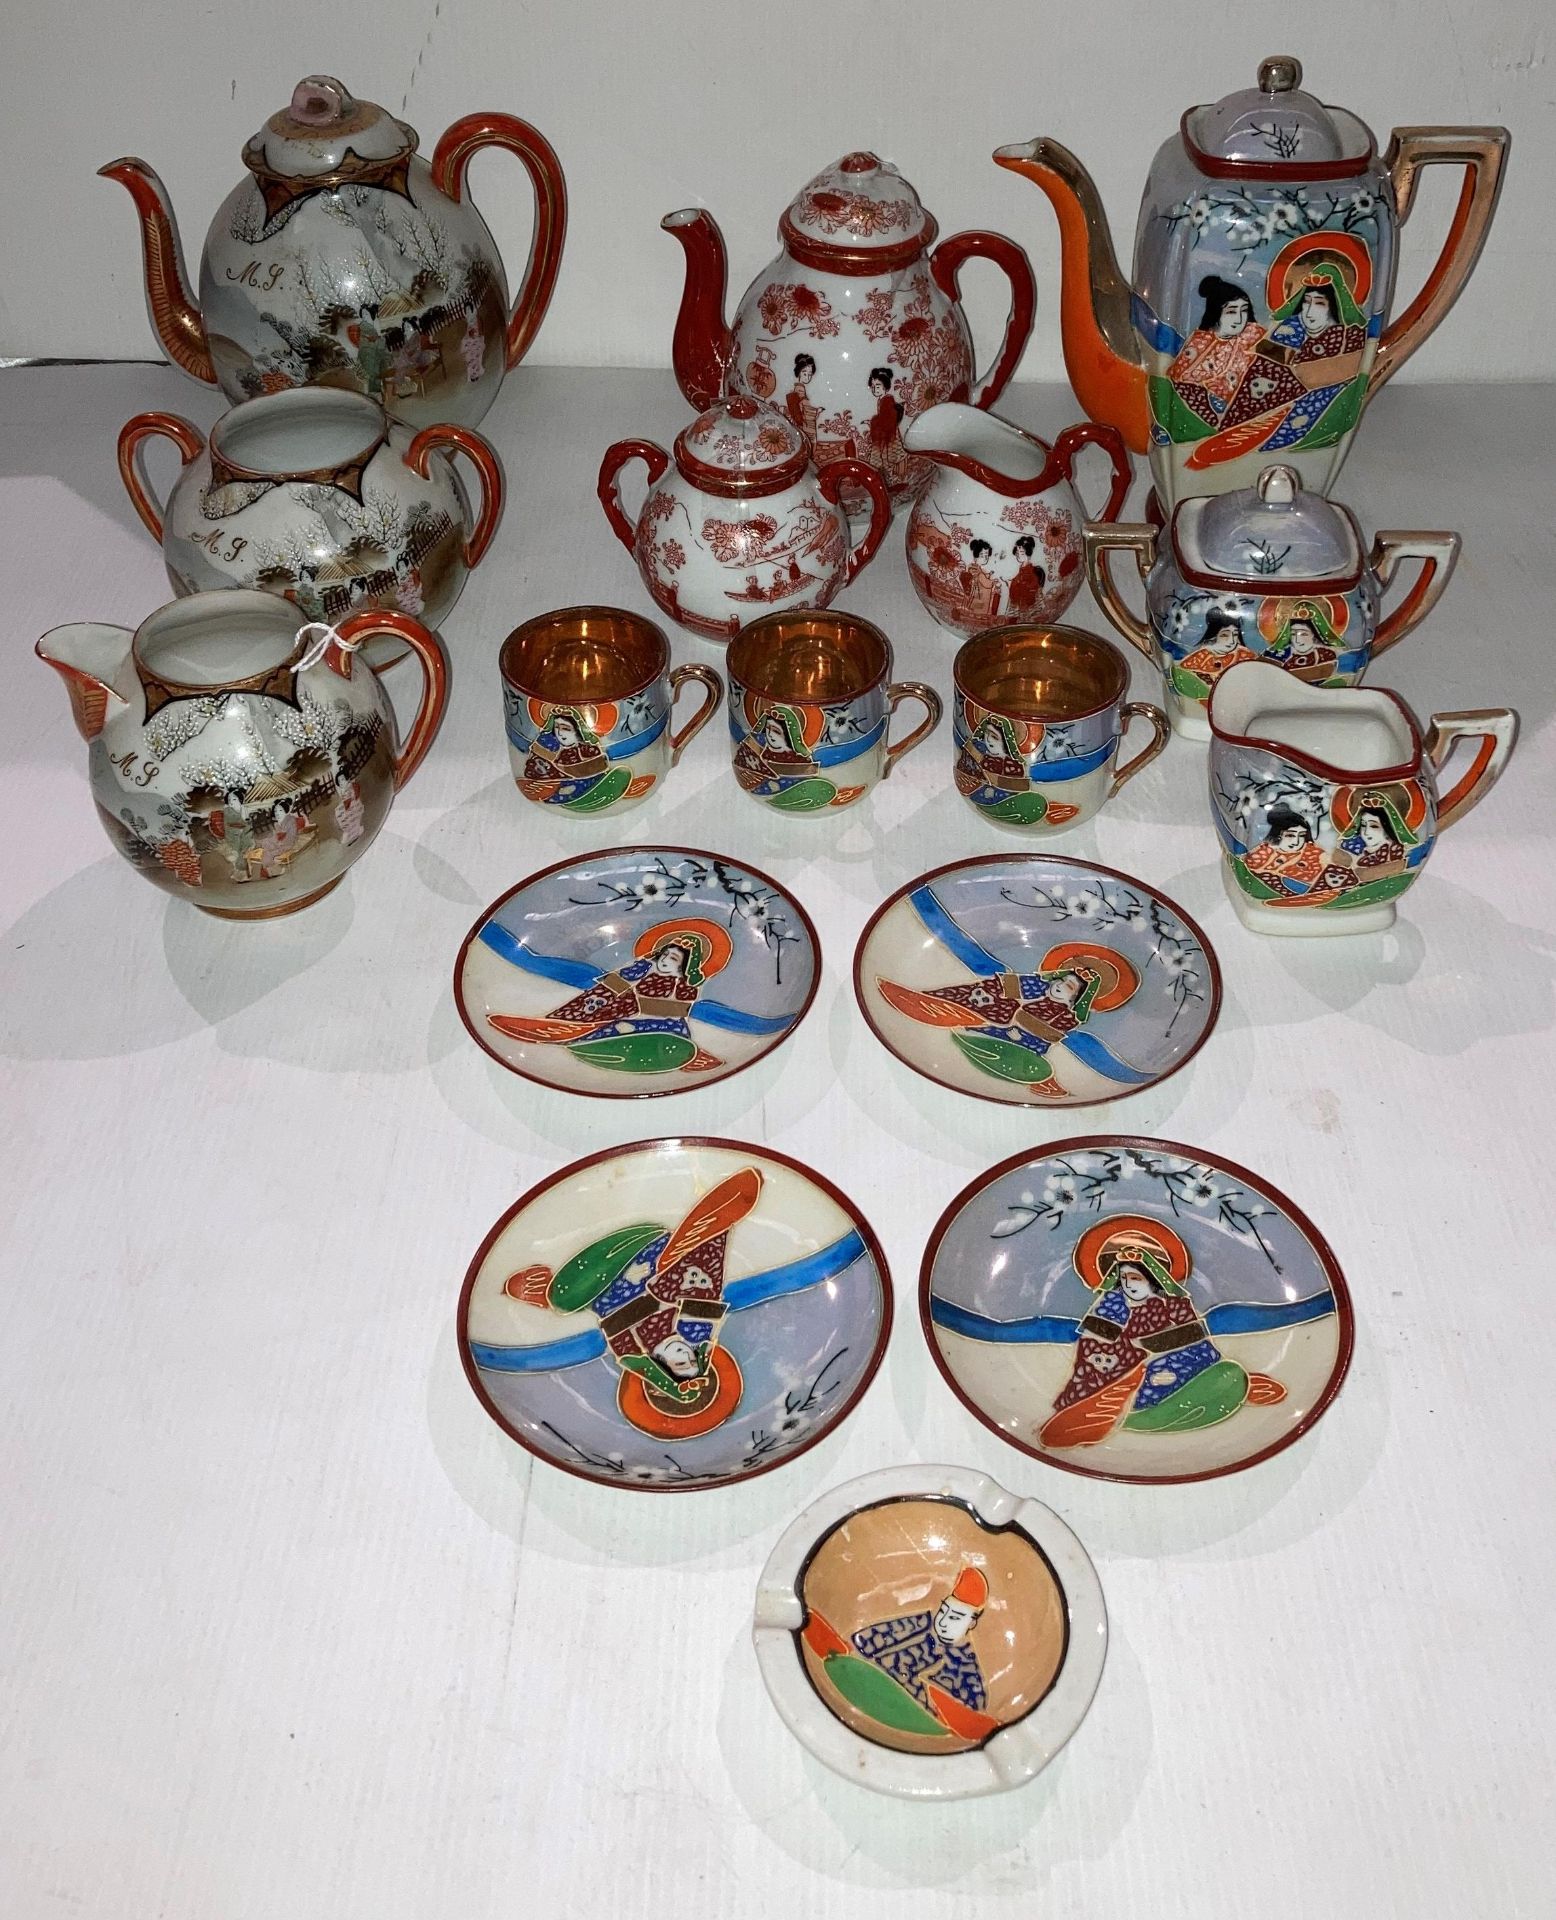 A hand-painted vintage Japanese Samurai 10-piece tea service with Geishas and gilt to inside of